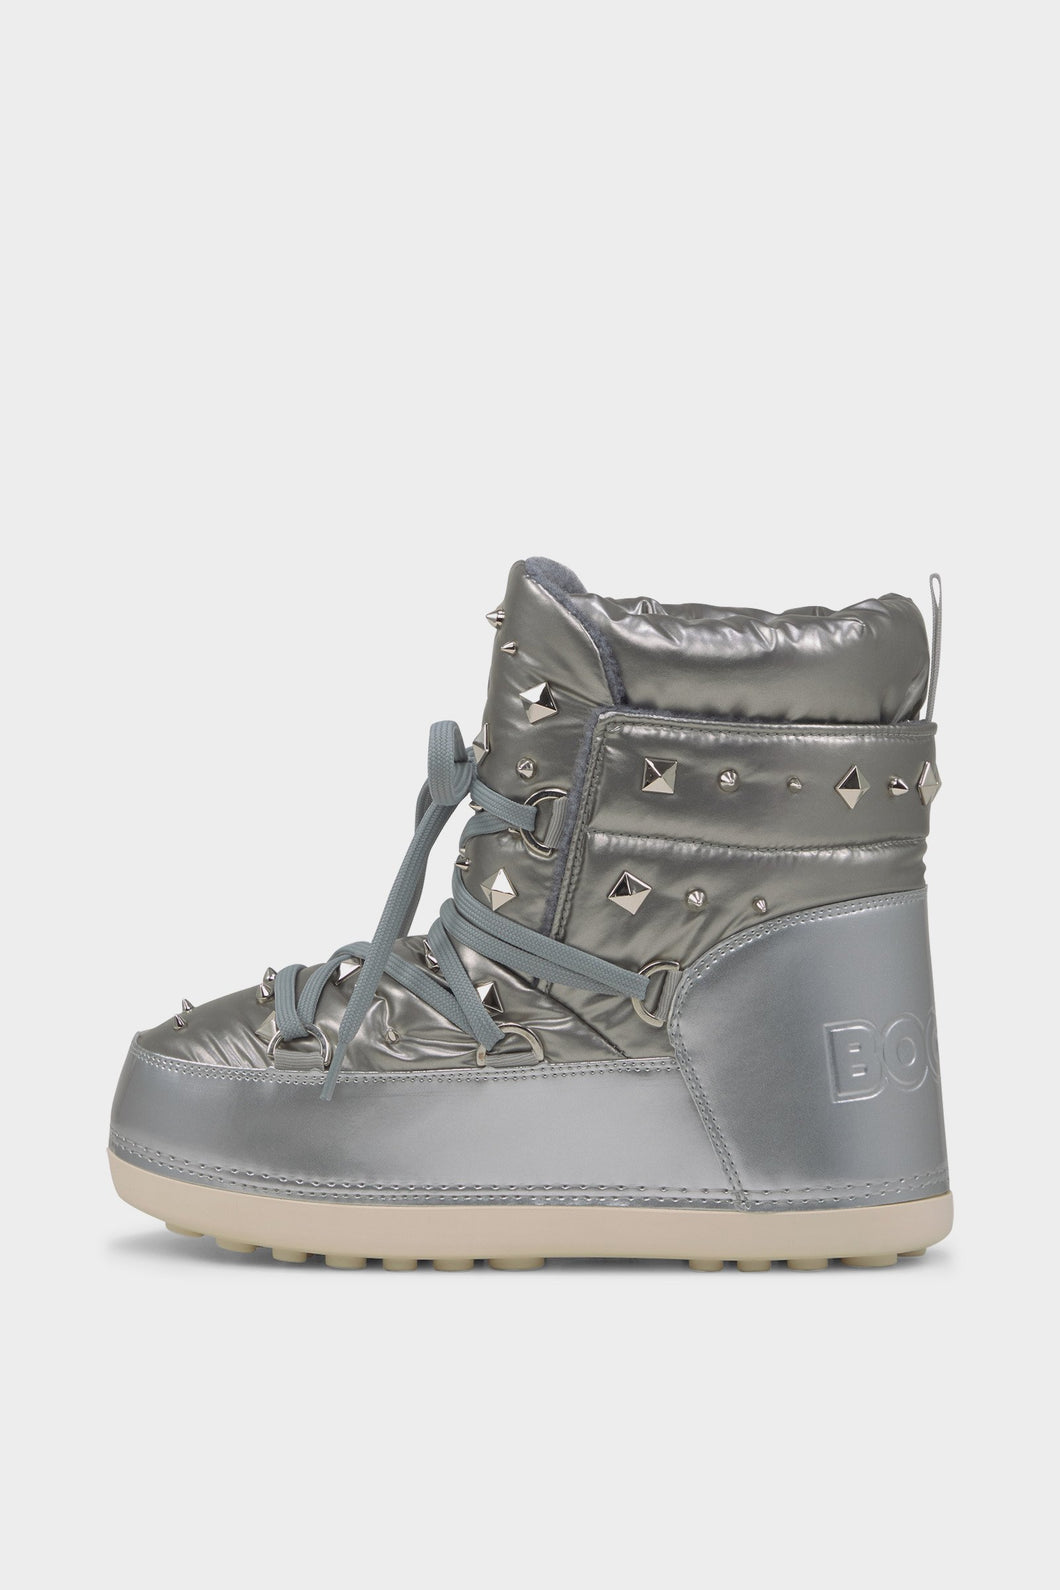 Trois Vallees 16 Studded Snow Boots - Silver